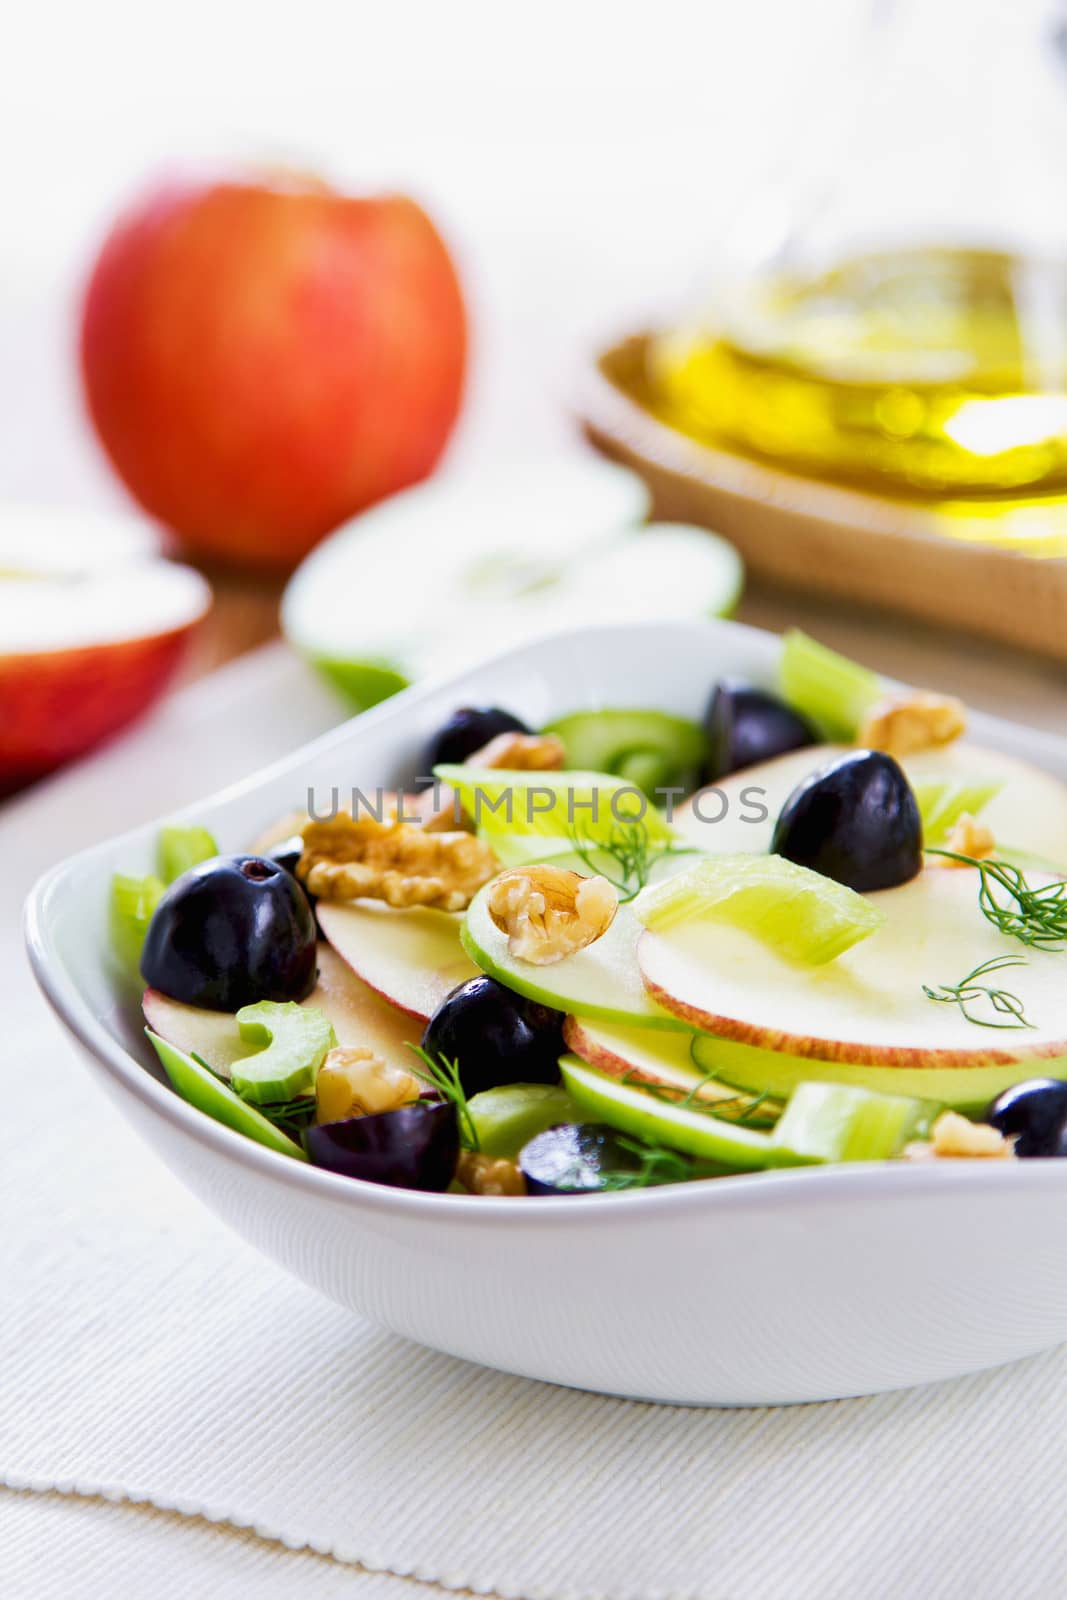 Apple with Celery, Grape and Walnut salad by vanillaechoes